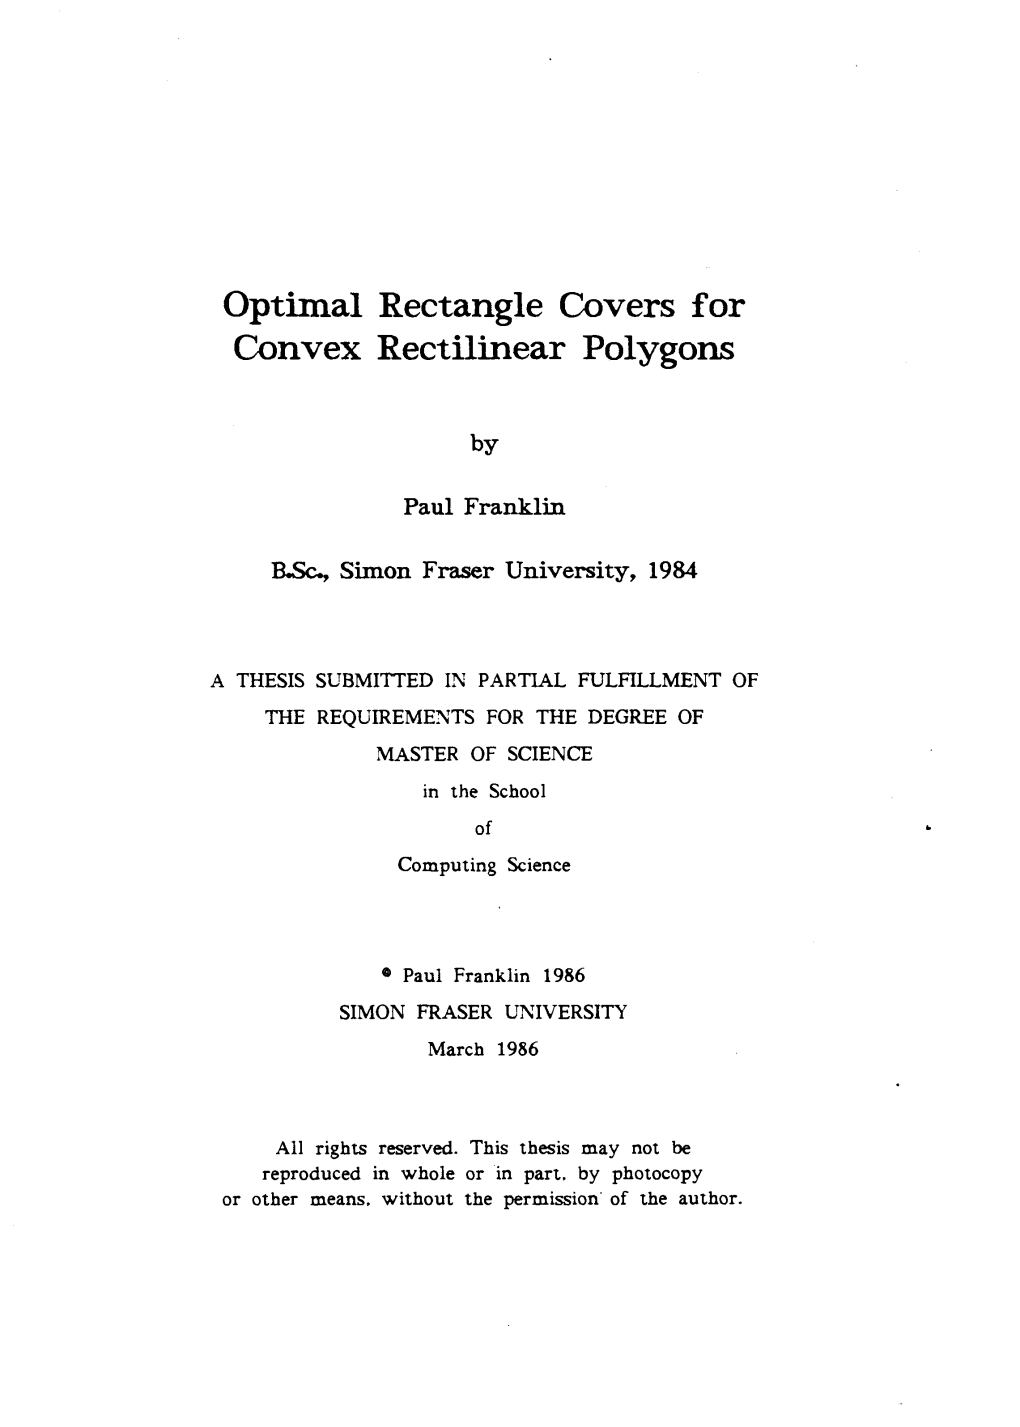 Optimal Rectangle Covers for Convex Rectilinear Polygons